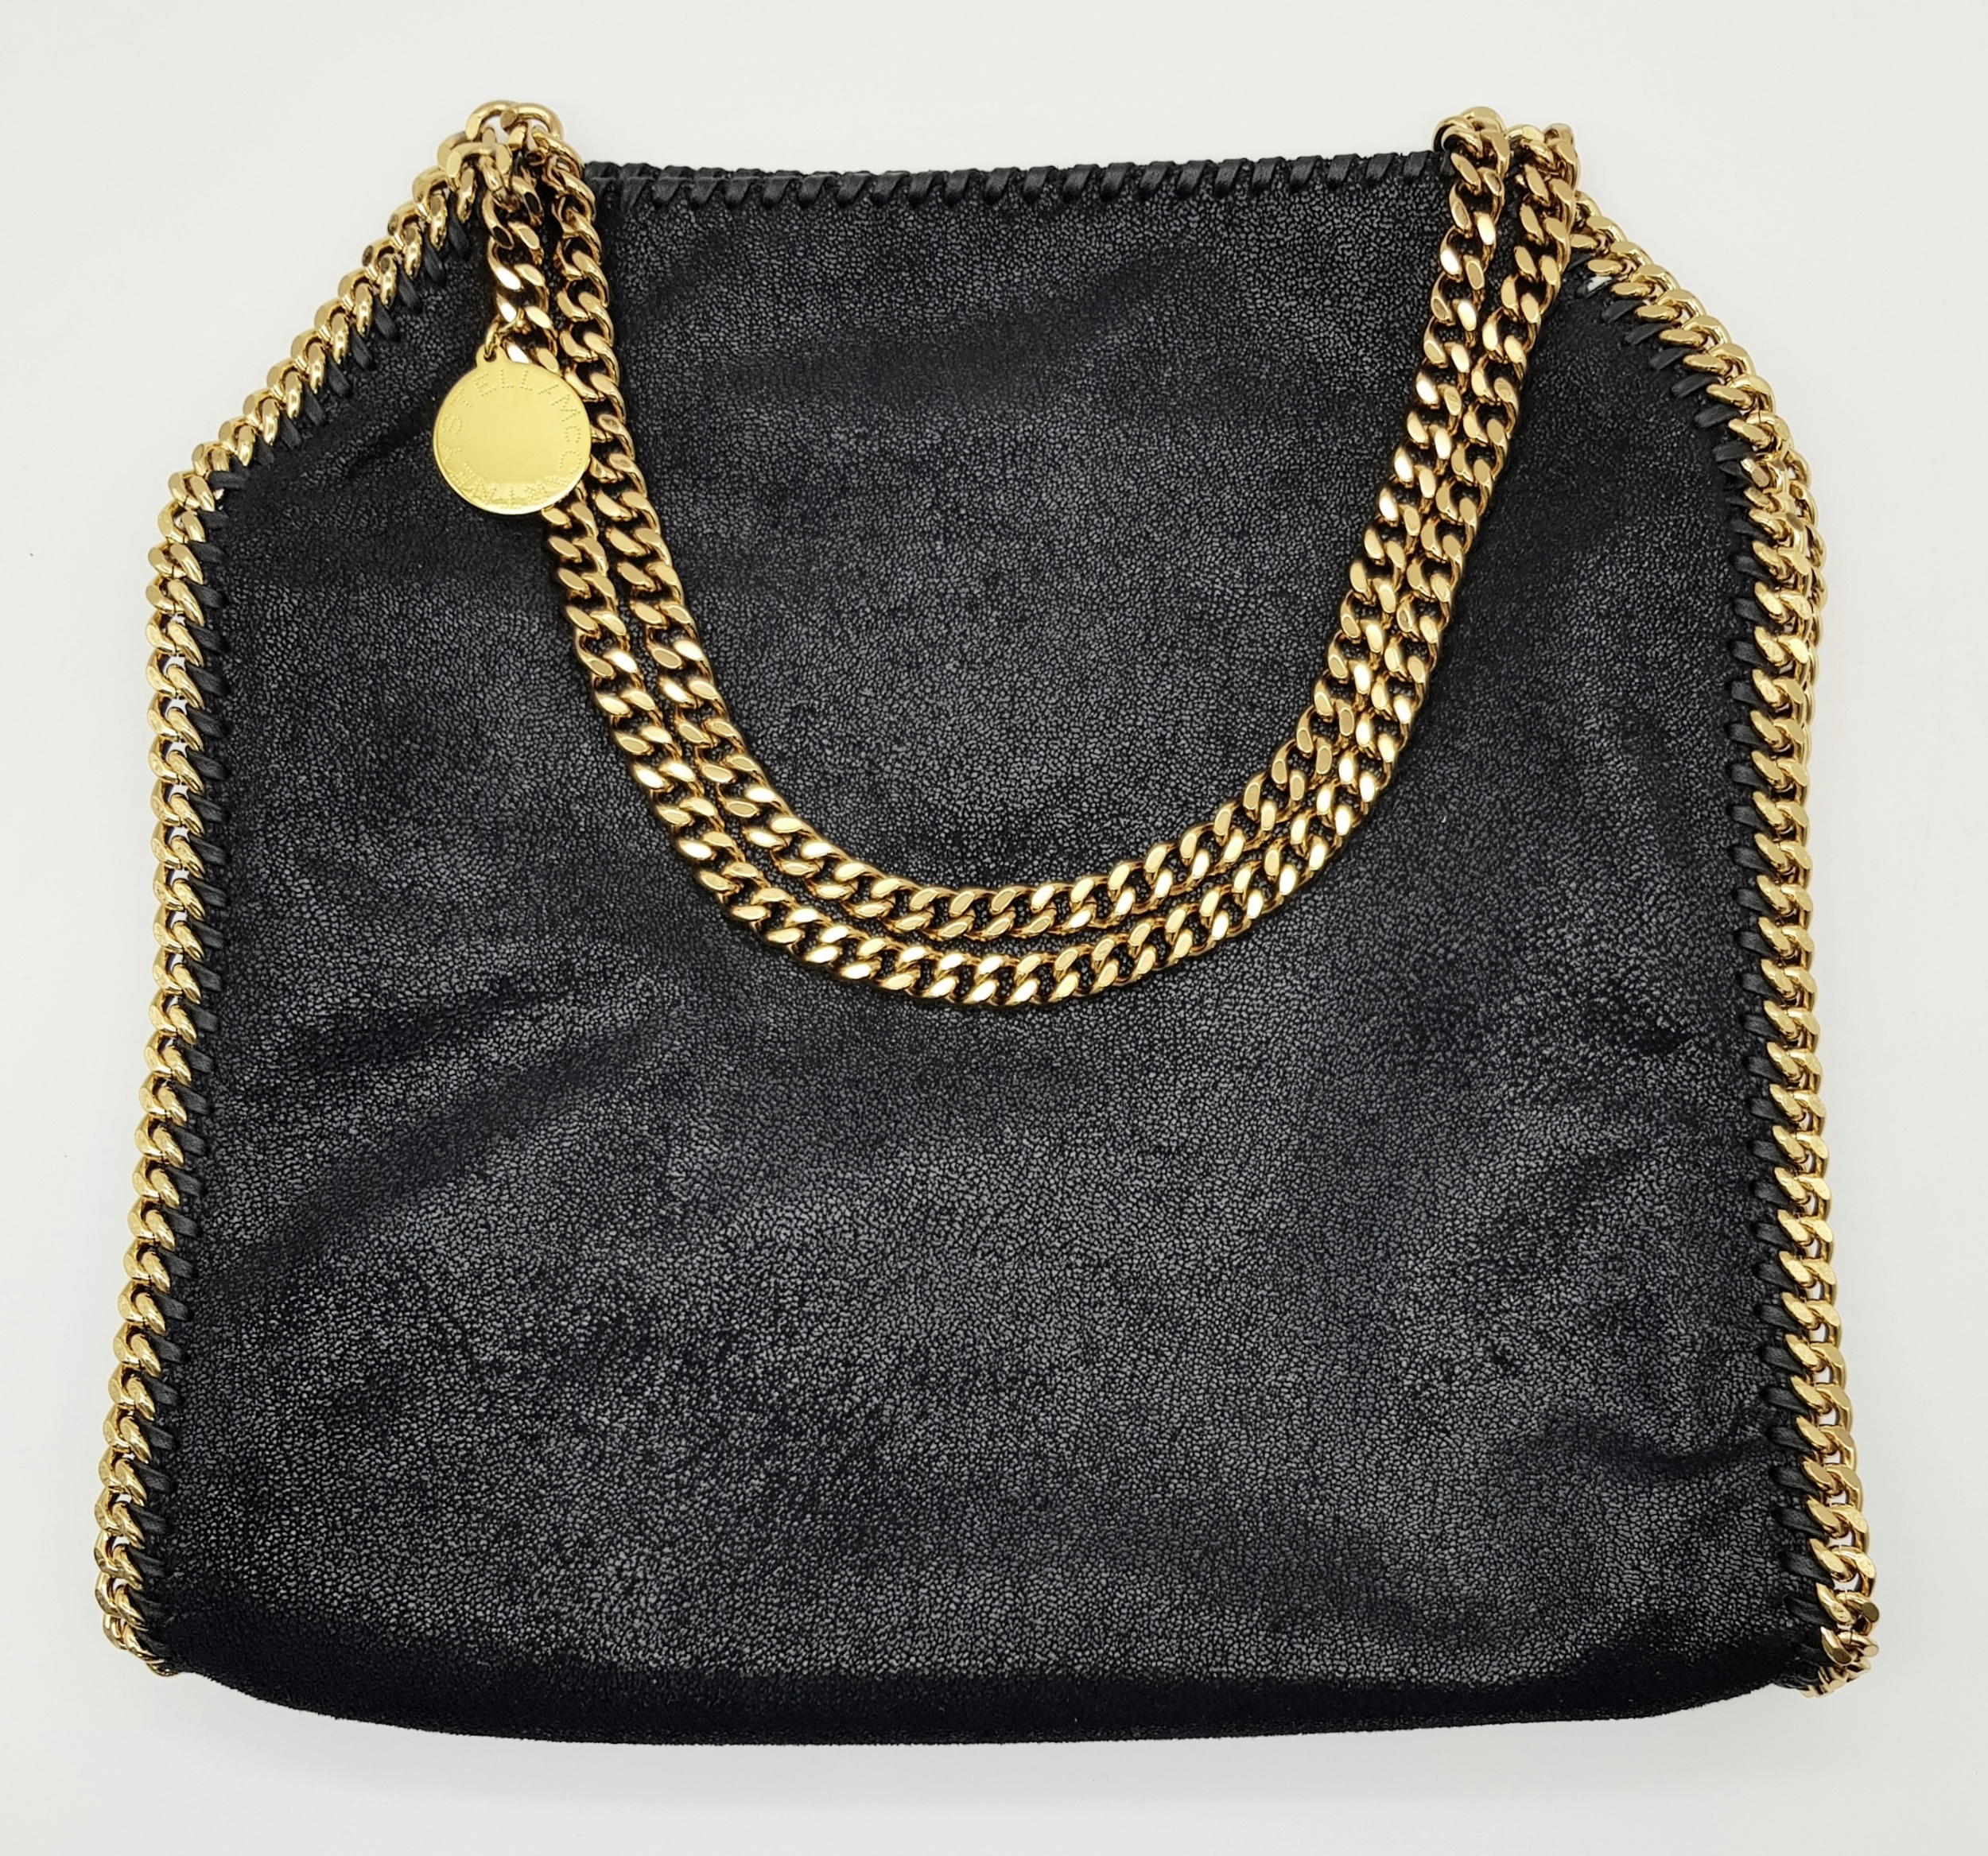 A Stella McCartney Black Falabella Shoulder/Tote Bag. Faux suede exterior with gold-toned heavy - Image 10 of 11